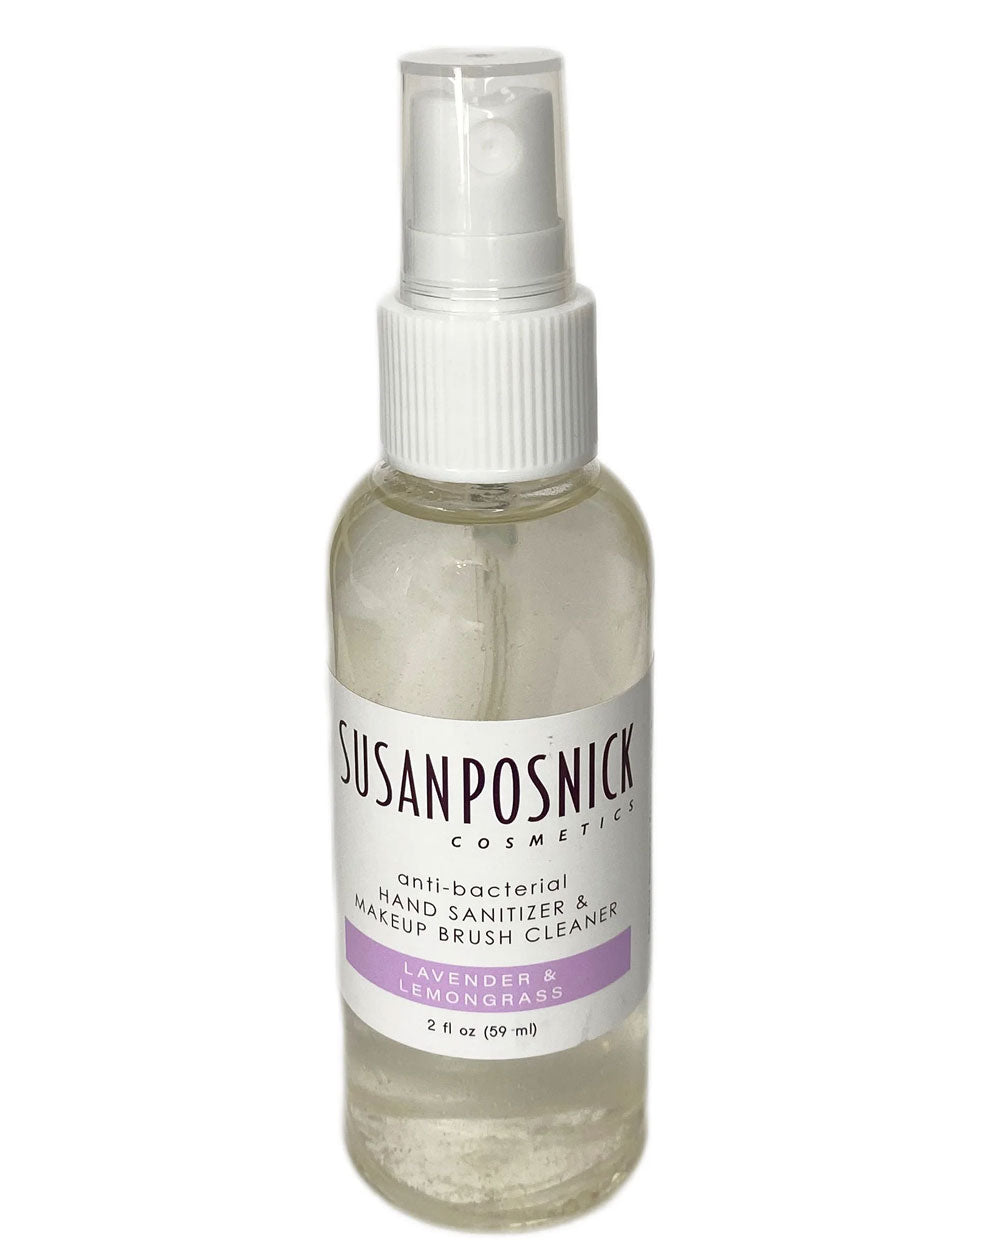 Lavender and Lemongrass Instant Dry Makeup Brush Cleaner and Hand Sanitizer 2oz